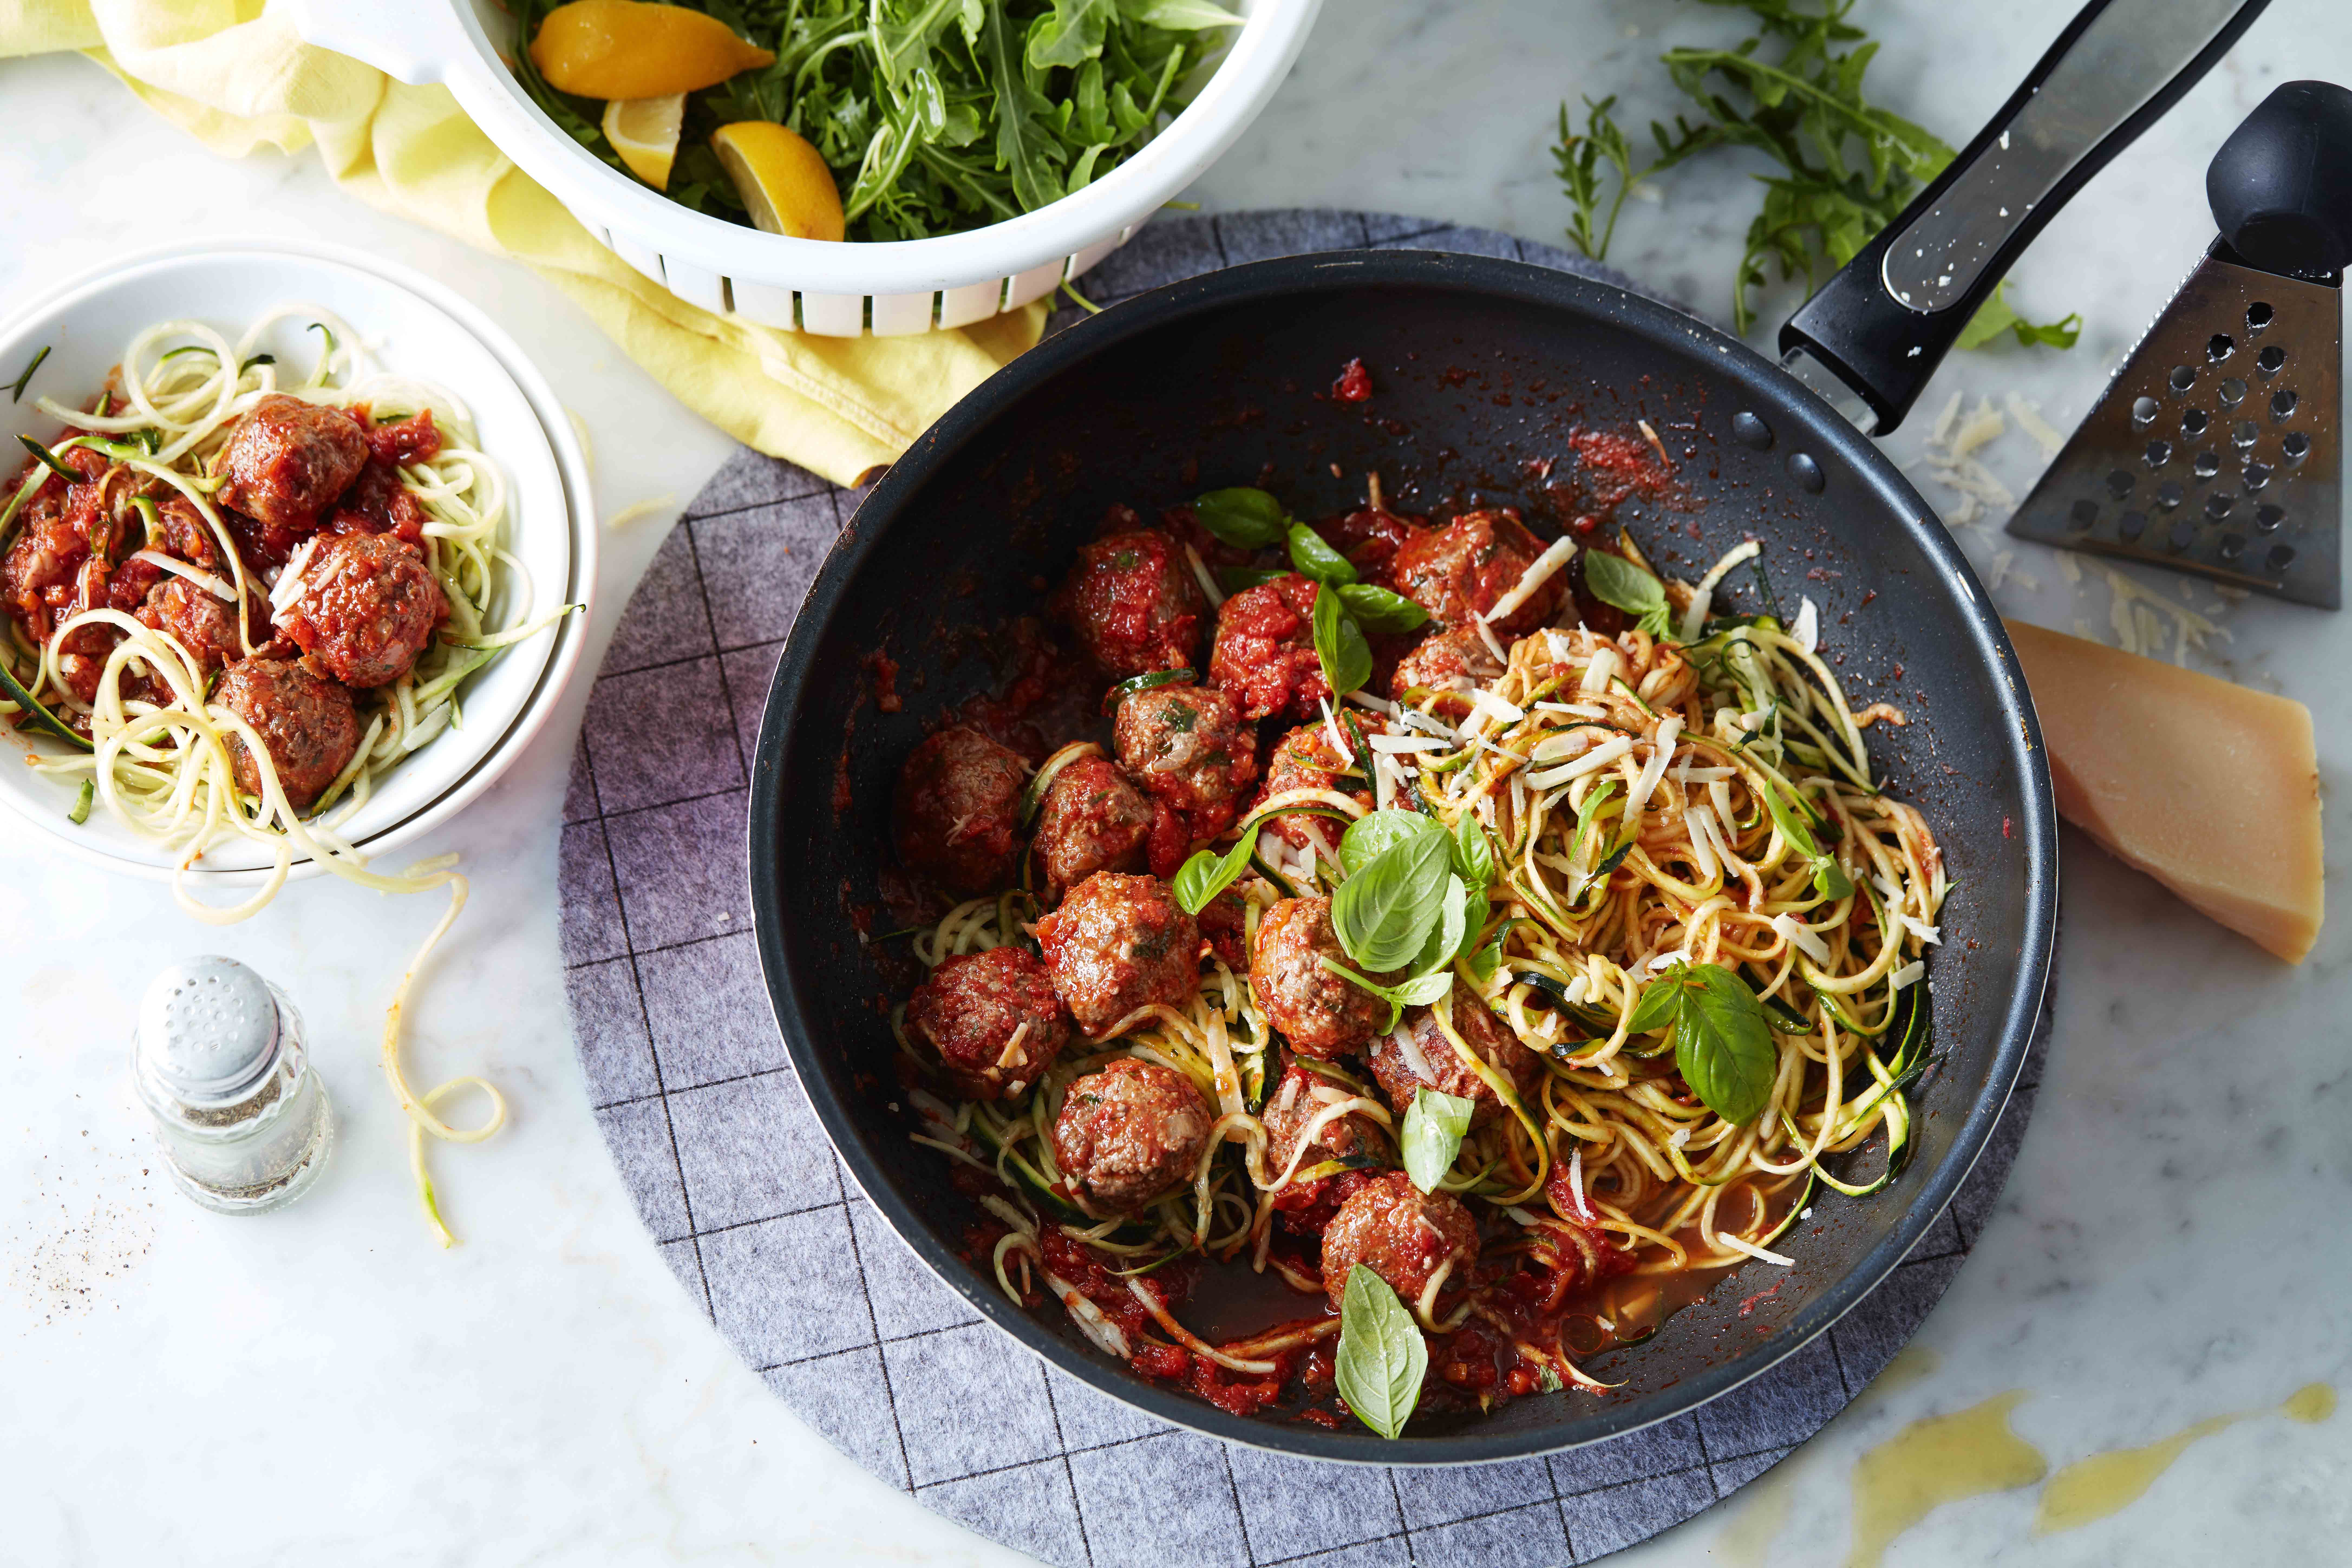 MEATBALLS AND ZUCCHINI NOODLES (ZOODLES)